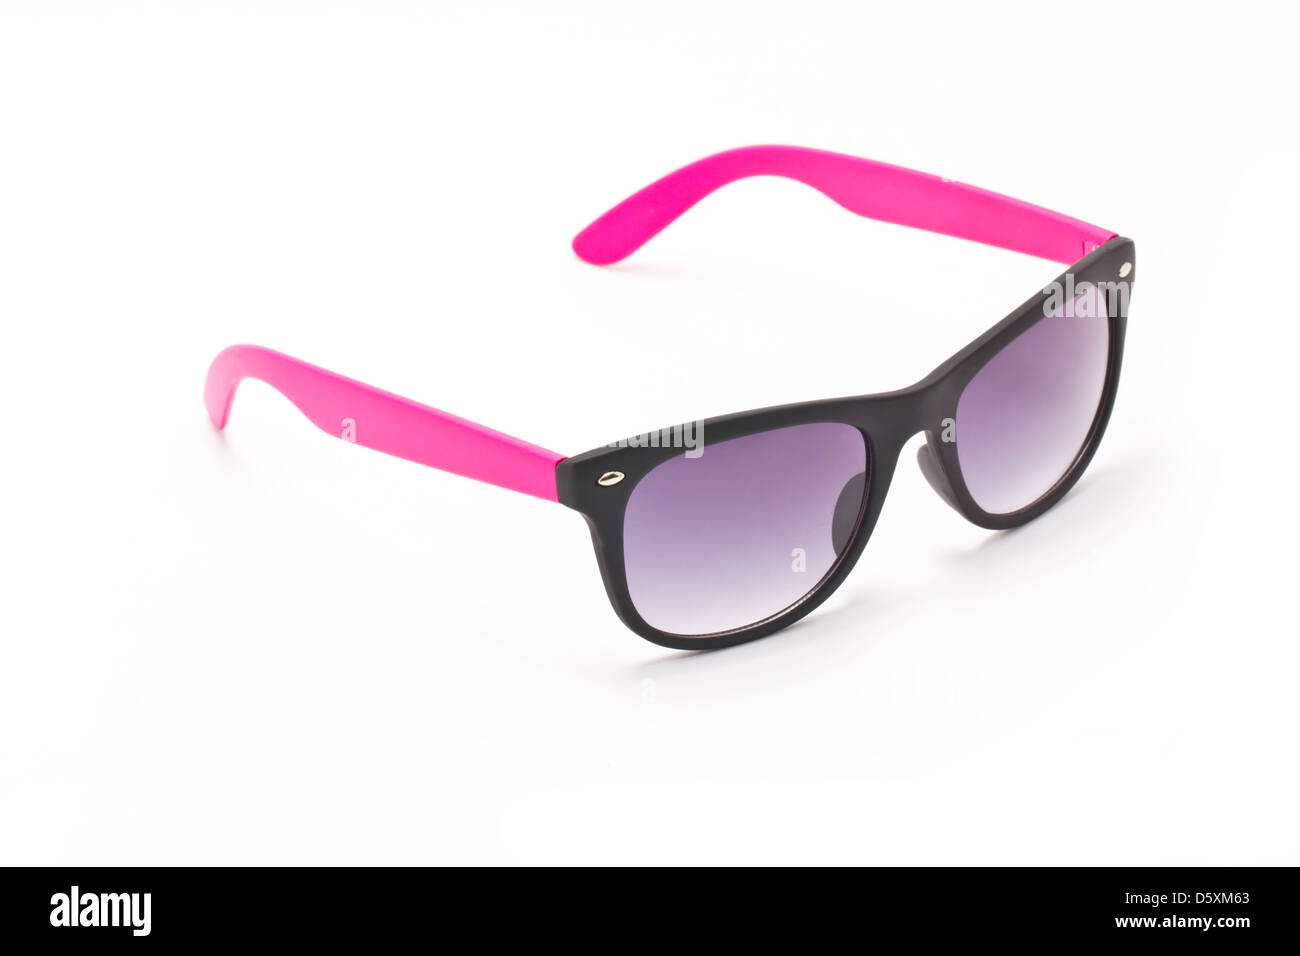 Women pink and black sun glasses isolated on white background. Stock Photo